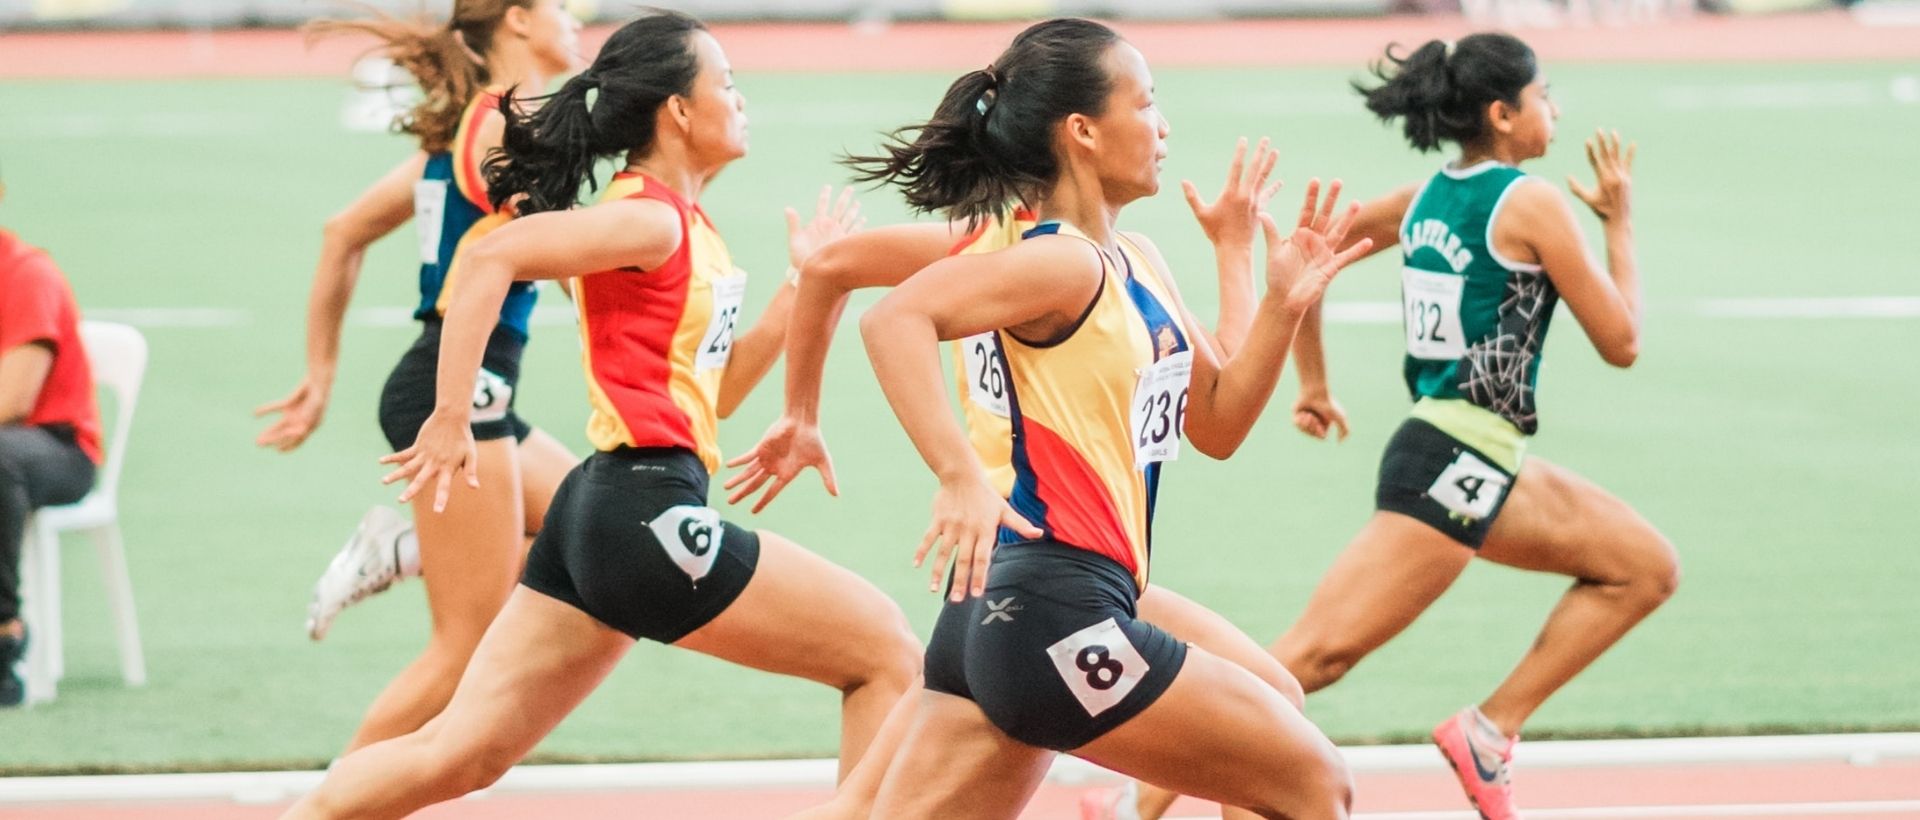 a group of women running on a track.